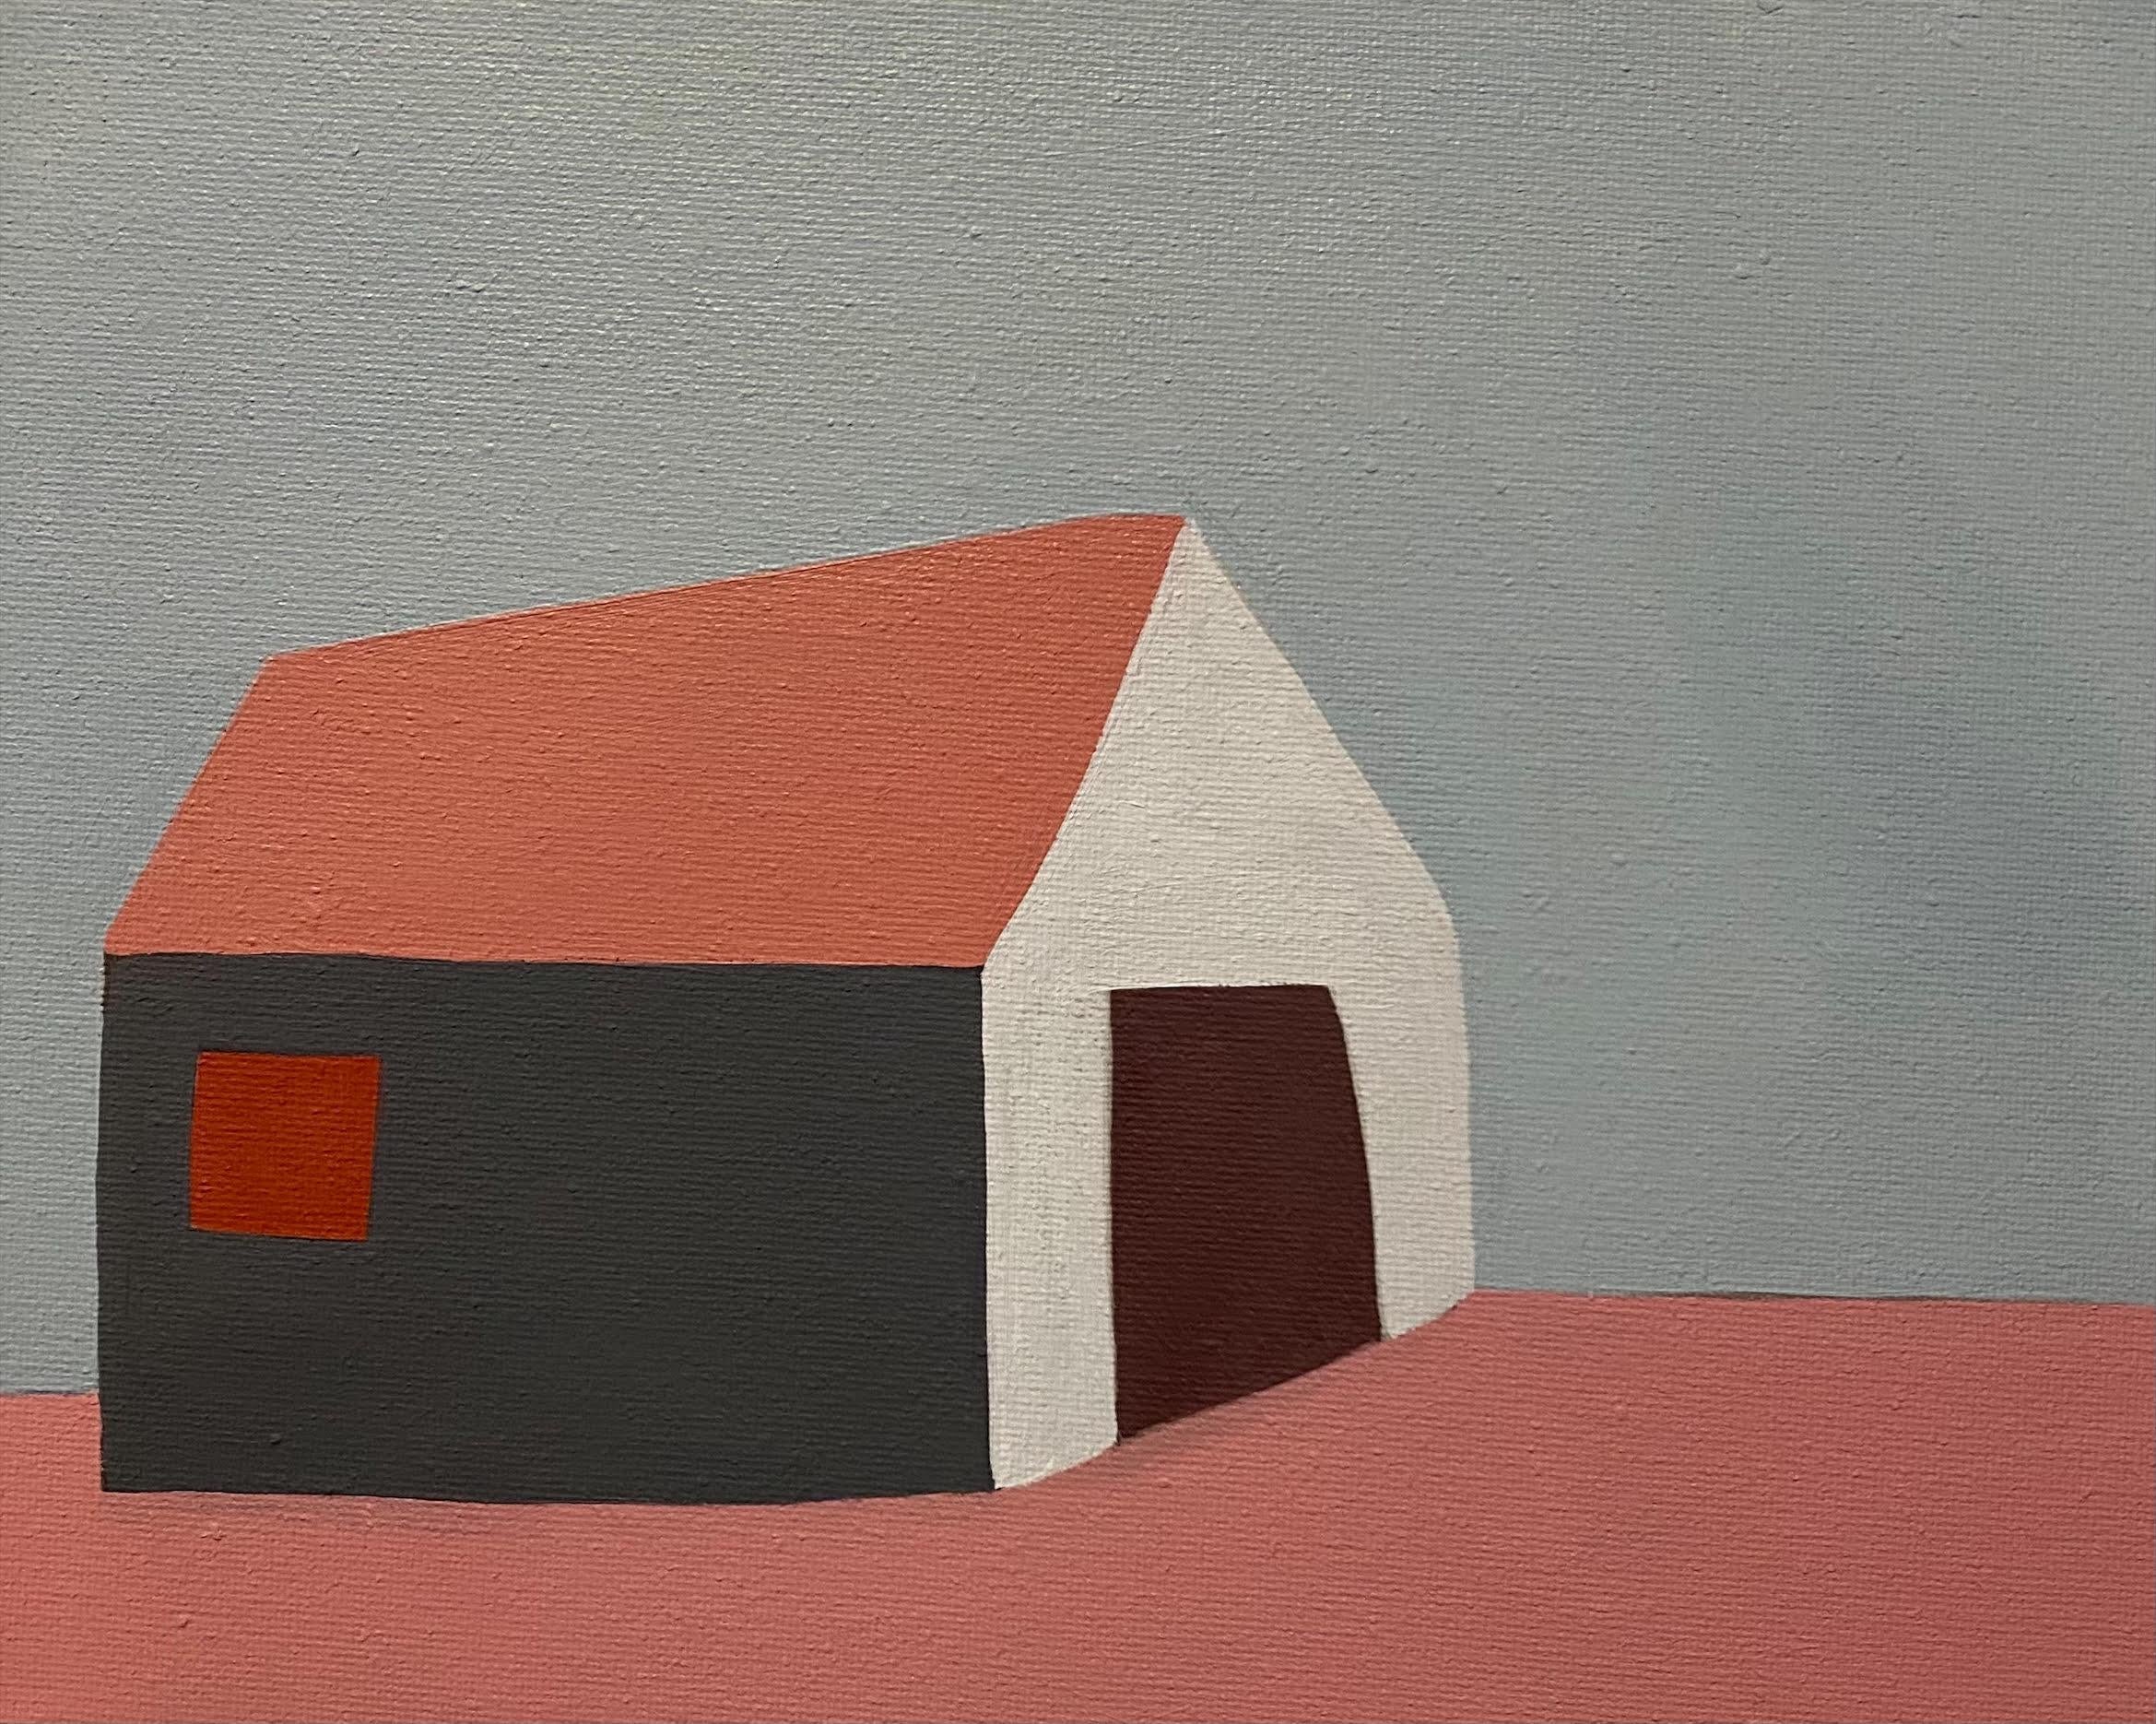 Sage Tucker-Ketcham Figurative Painting - "White and Gray Shed on Beach" Pink and Dark Gray shed atop a salmon toned beach